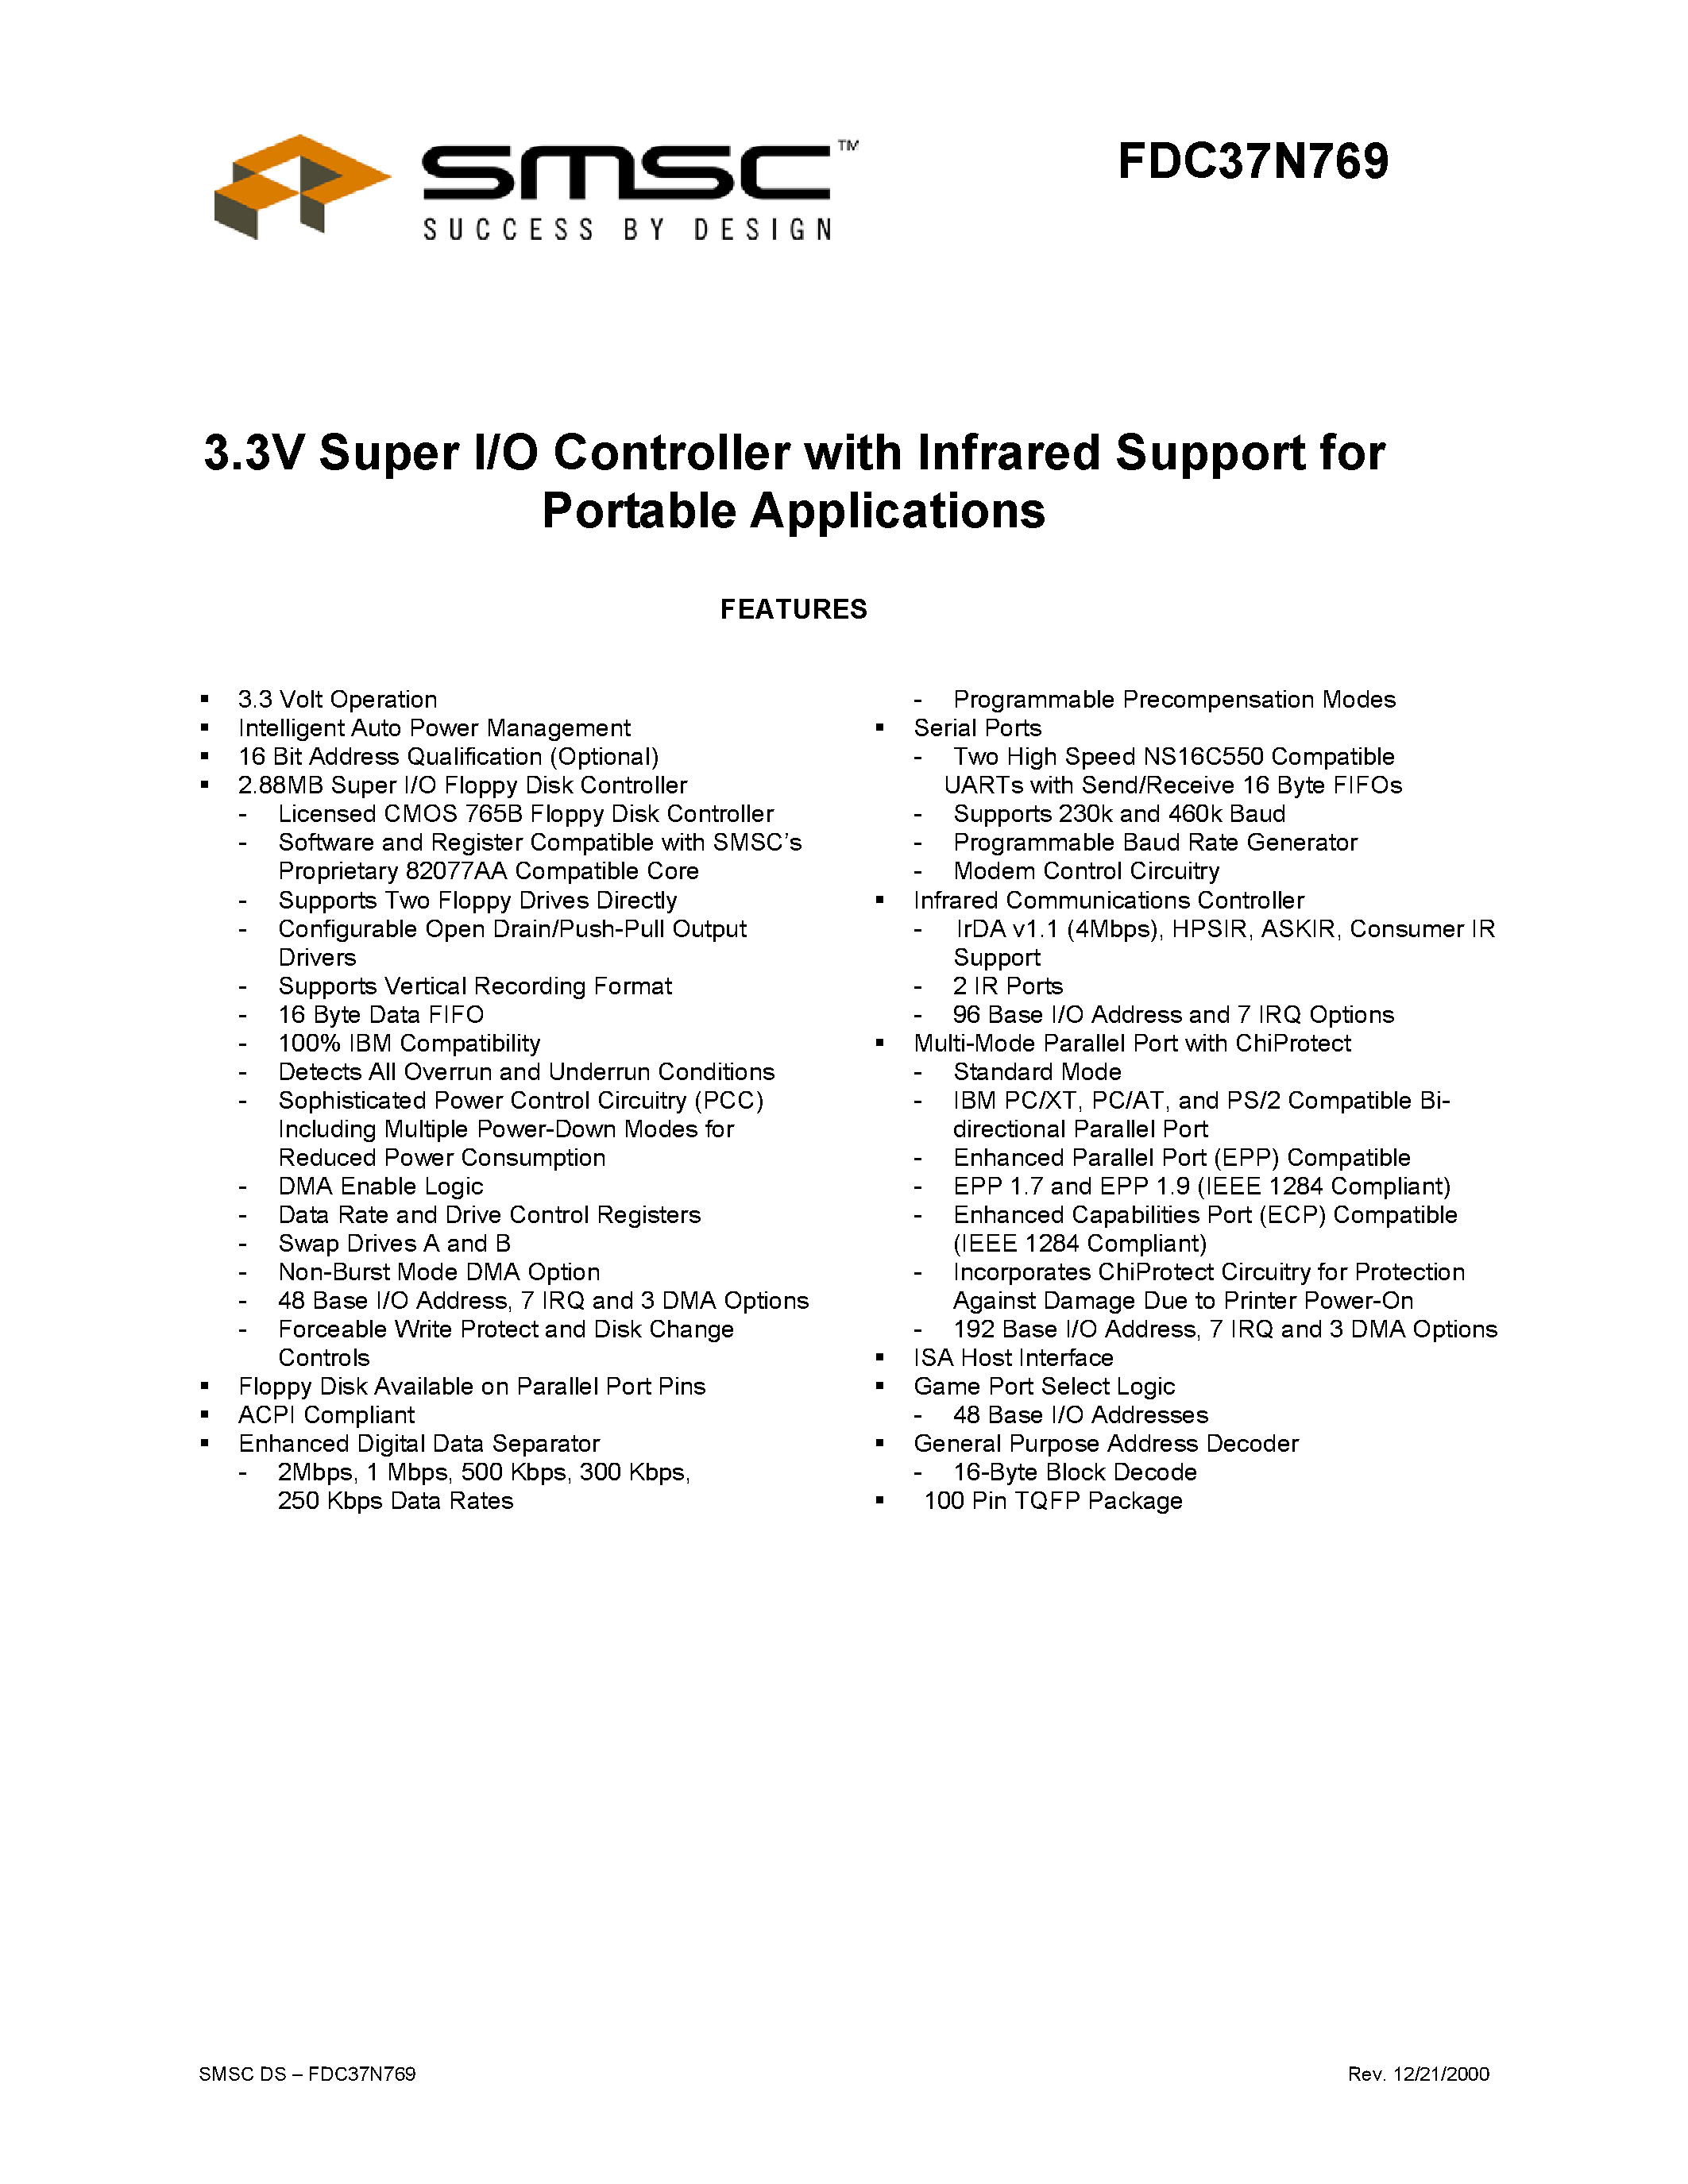 Datasheet FDC37N769 - 3.3V SUPER I/O CONTROLLER WITH INFRARED SUPPORT FOR PORTABLE APPLICATIONS page 1